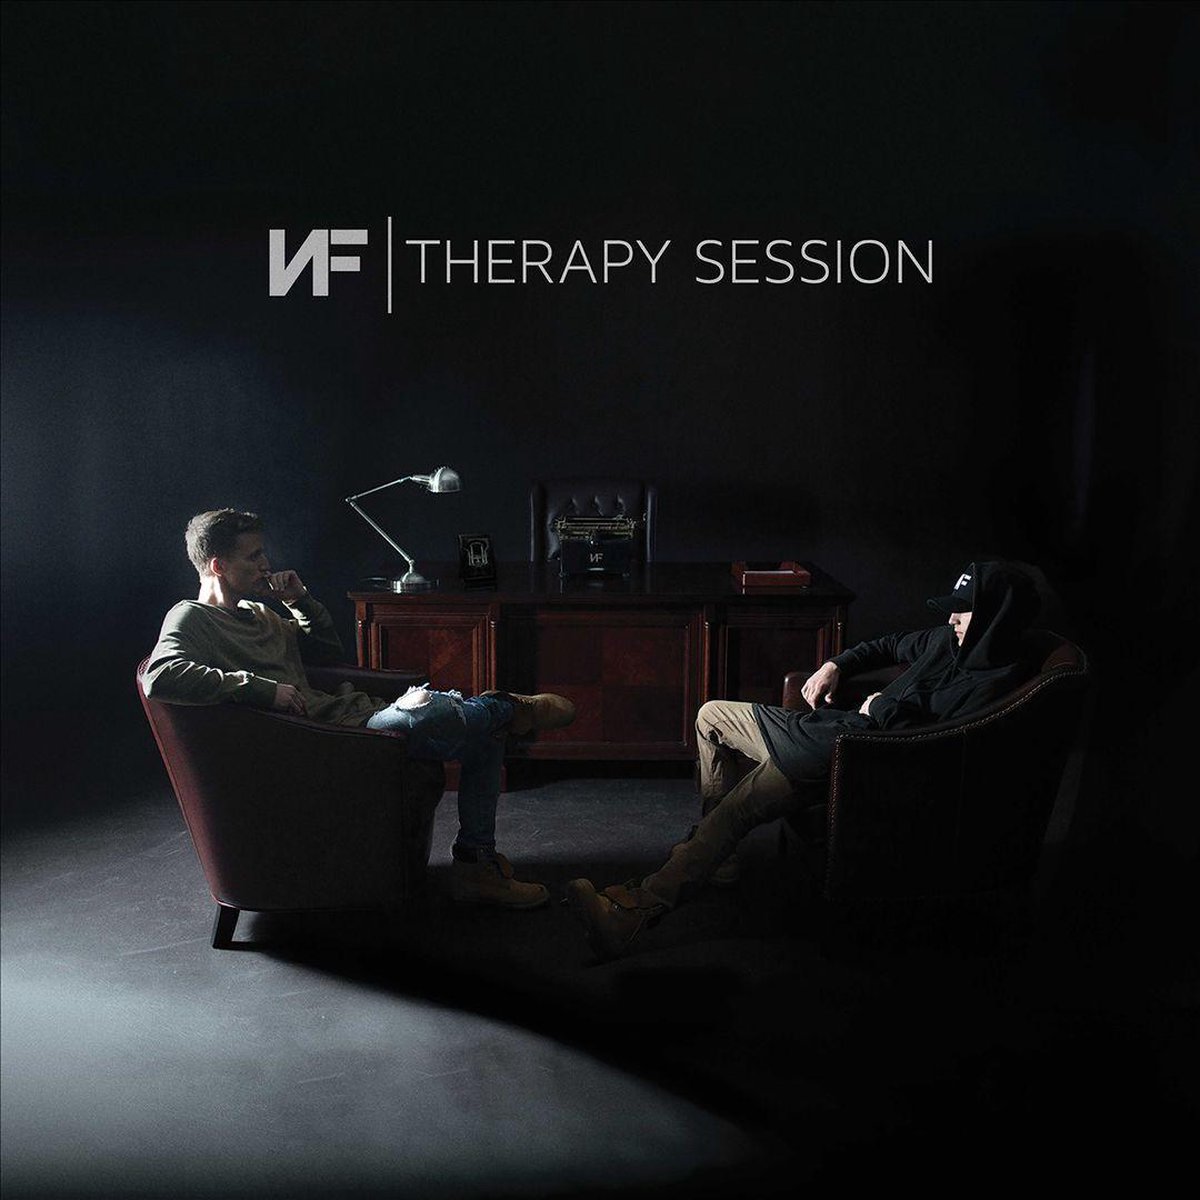 Therapy Session - Nf